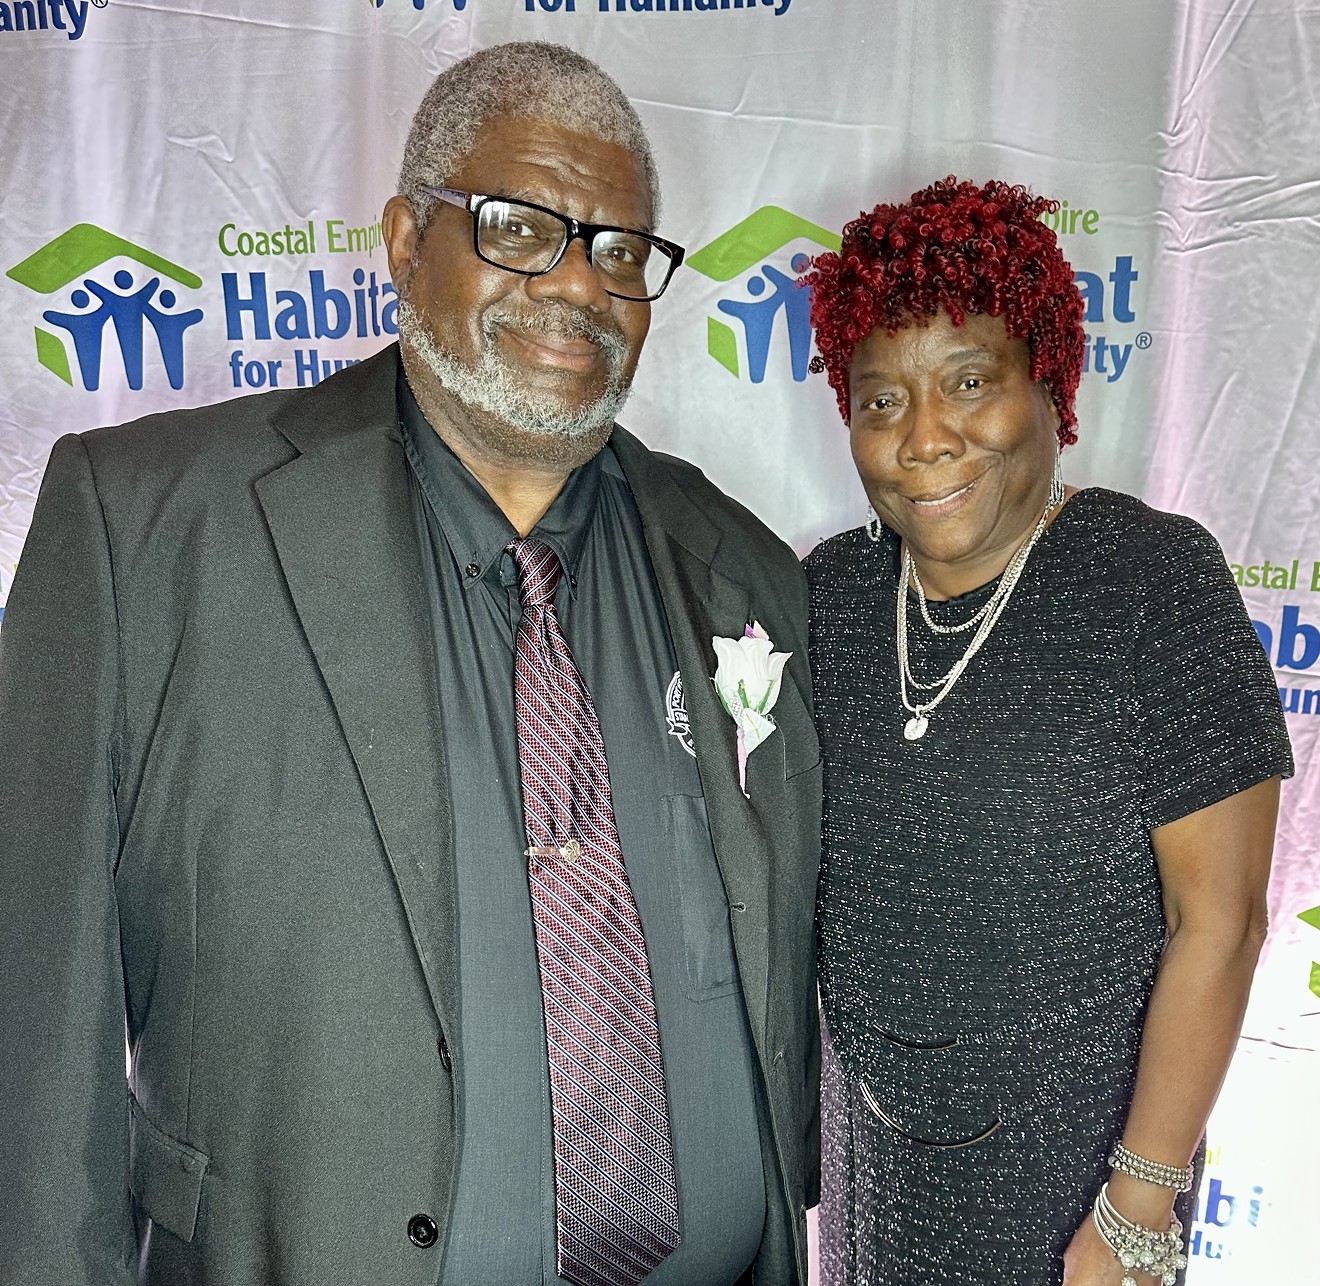 Habitat for Humanity “Home for the Holidays” Gala Celebration